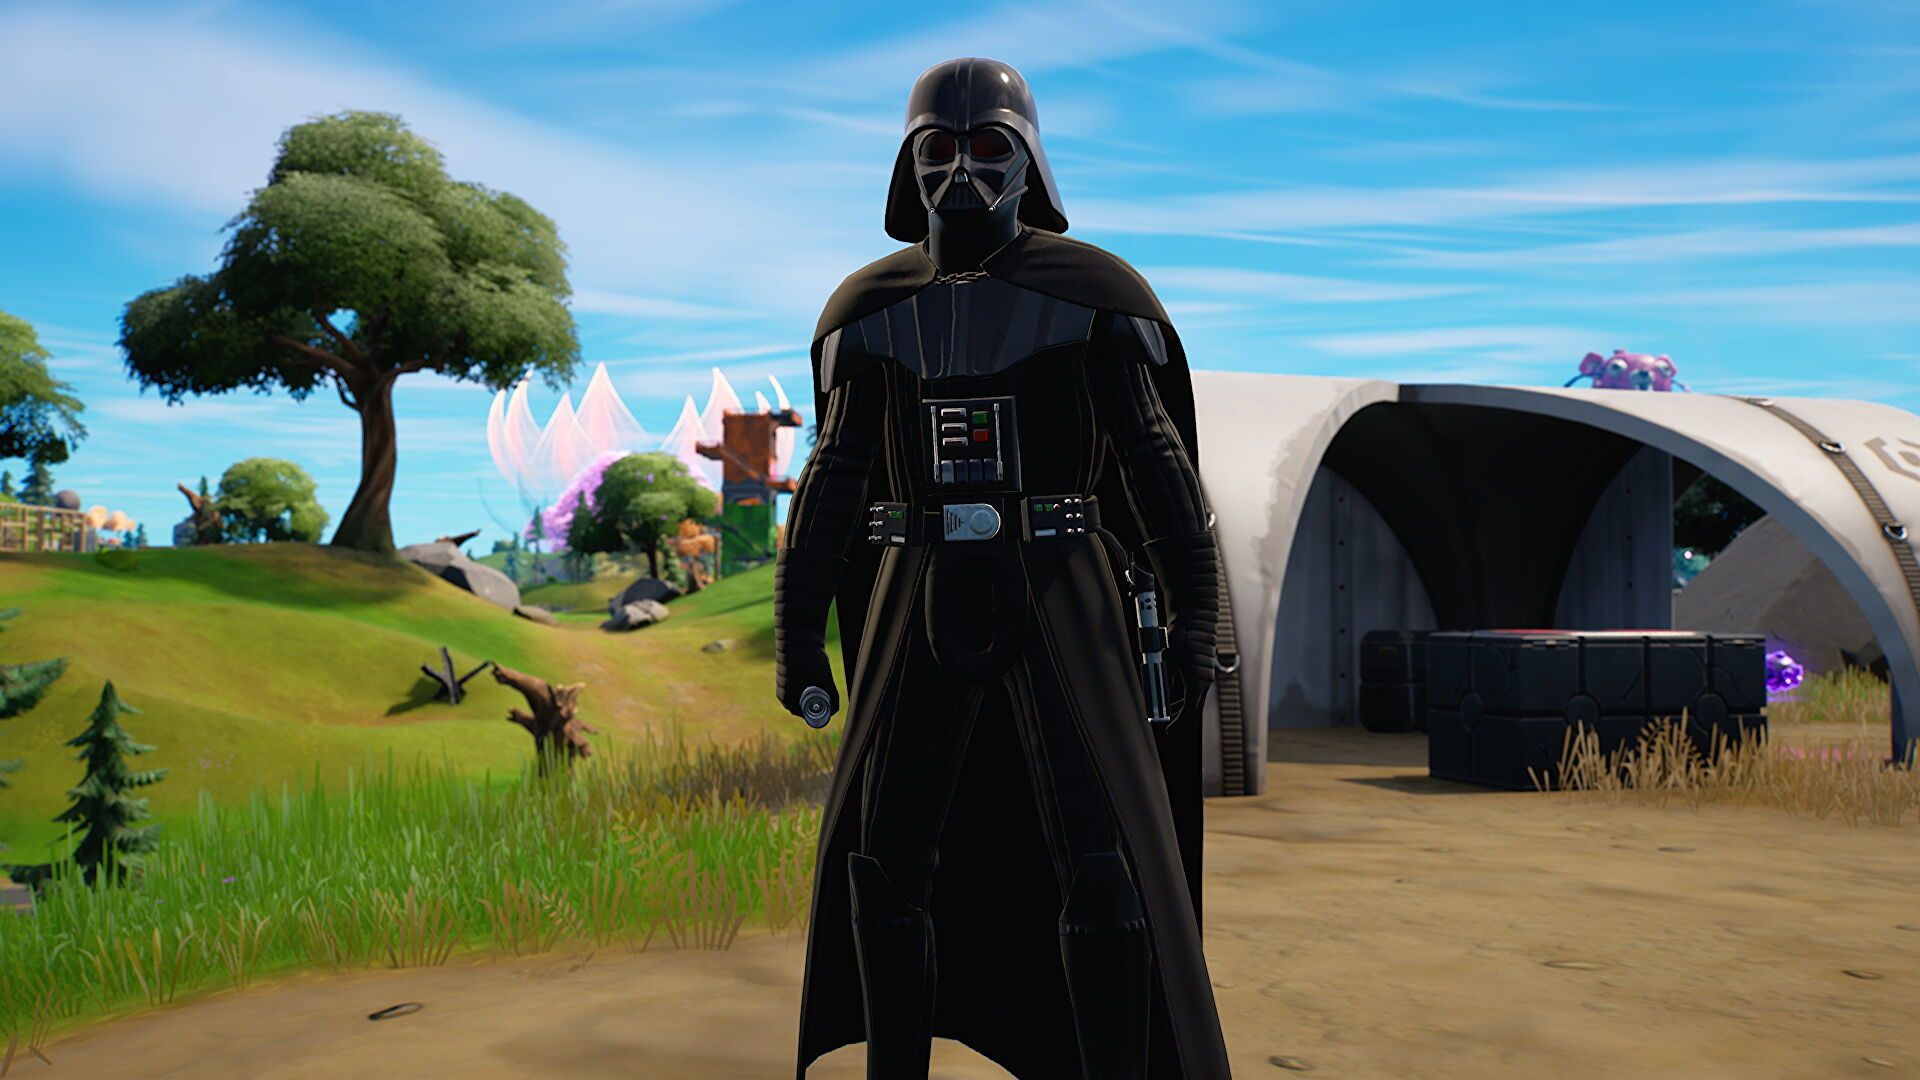 Today, we are covering how to get Star Wars weapons in Fortnite, where to find Star Wars weapons Fortnite, as well as Darth Vader Fortnite location.